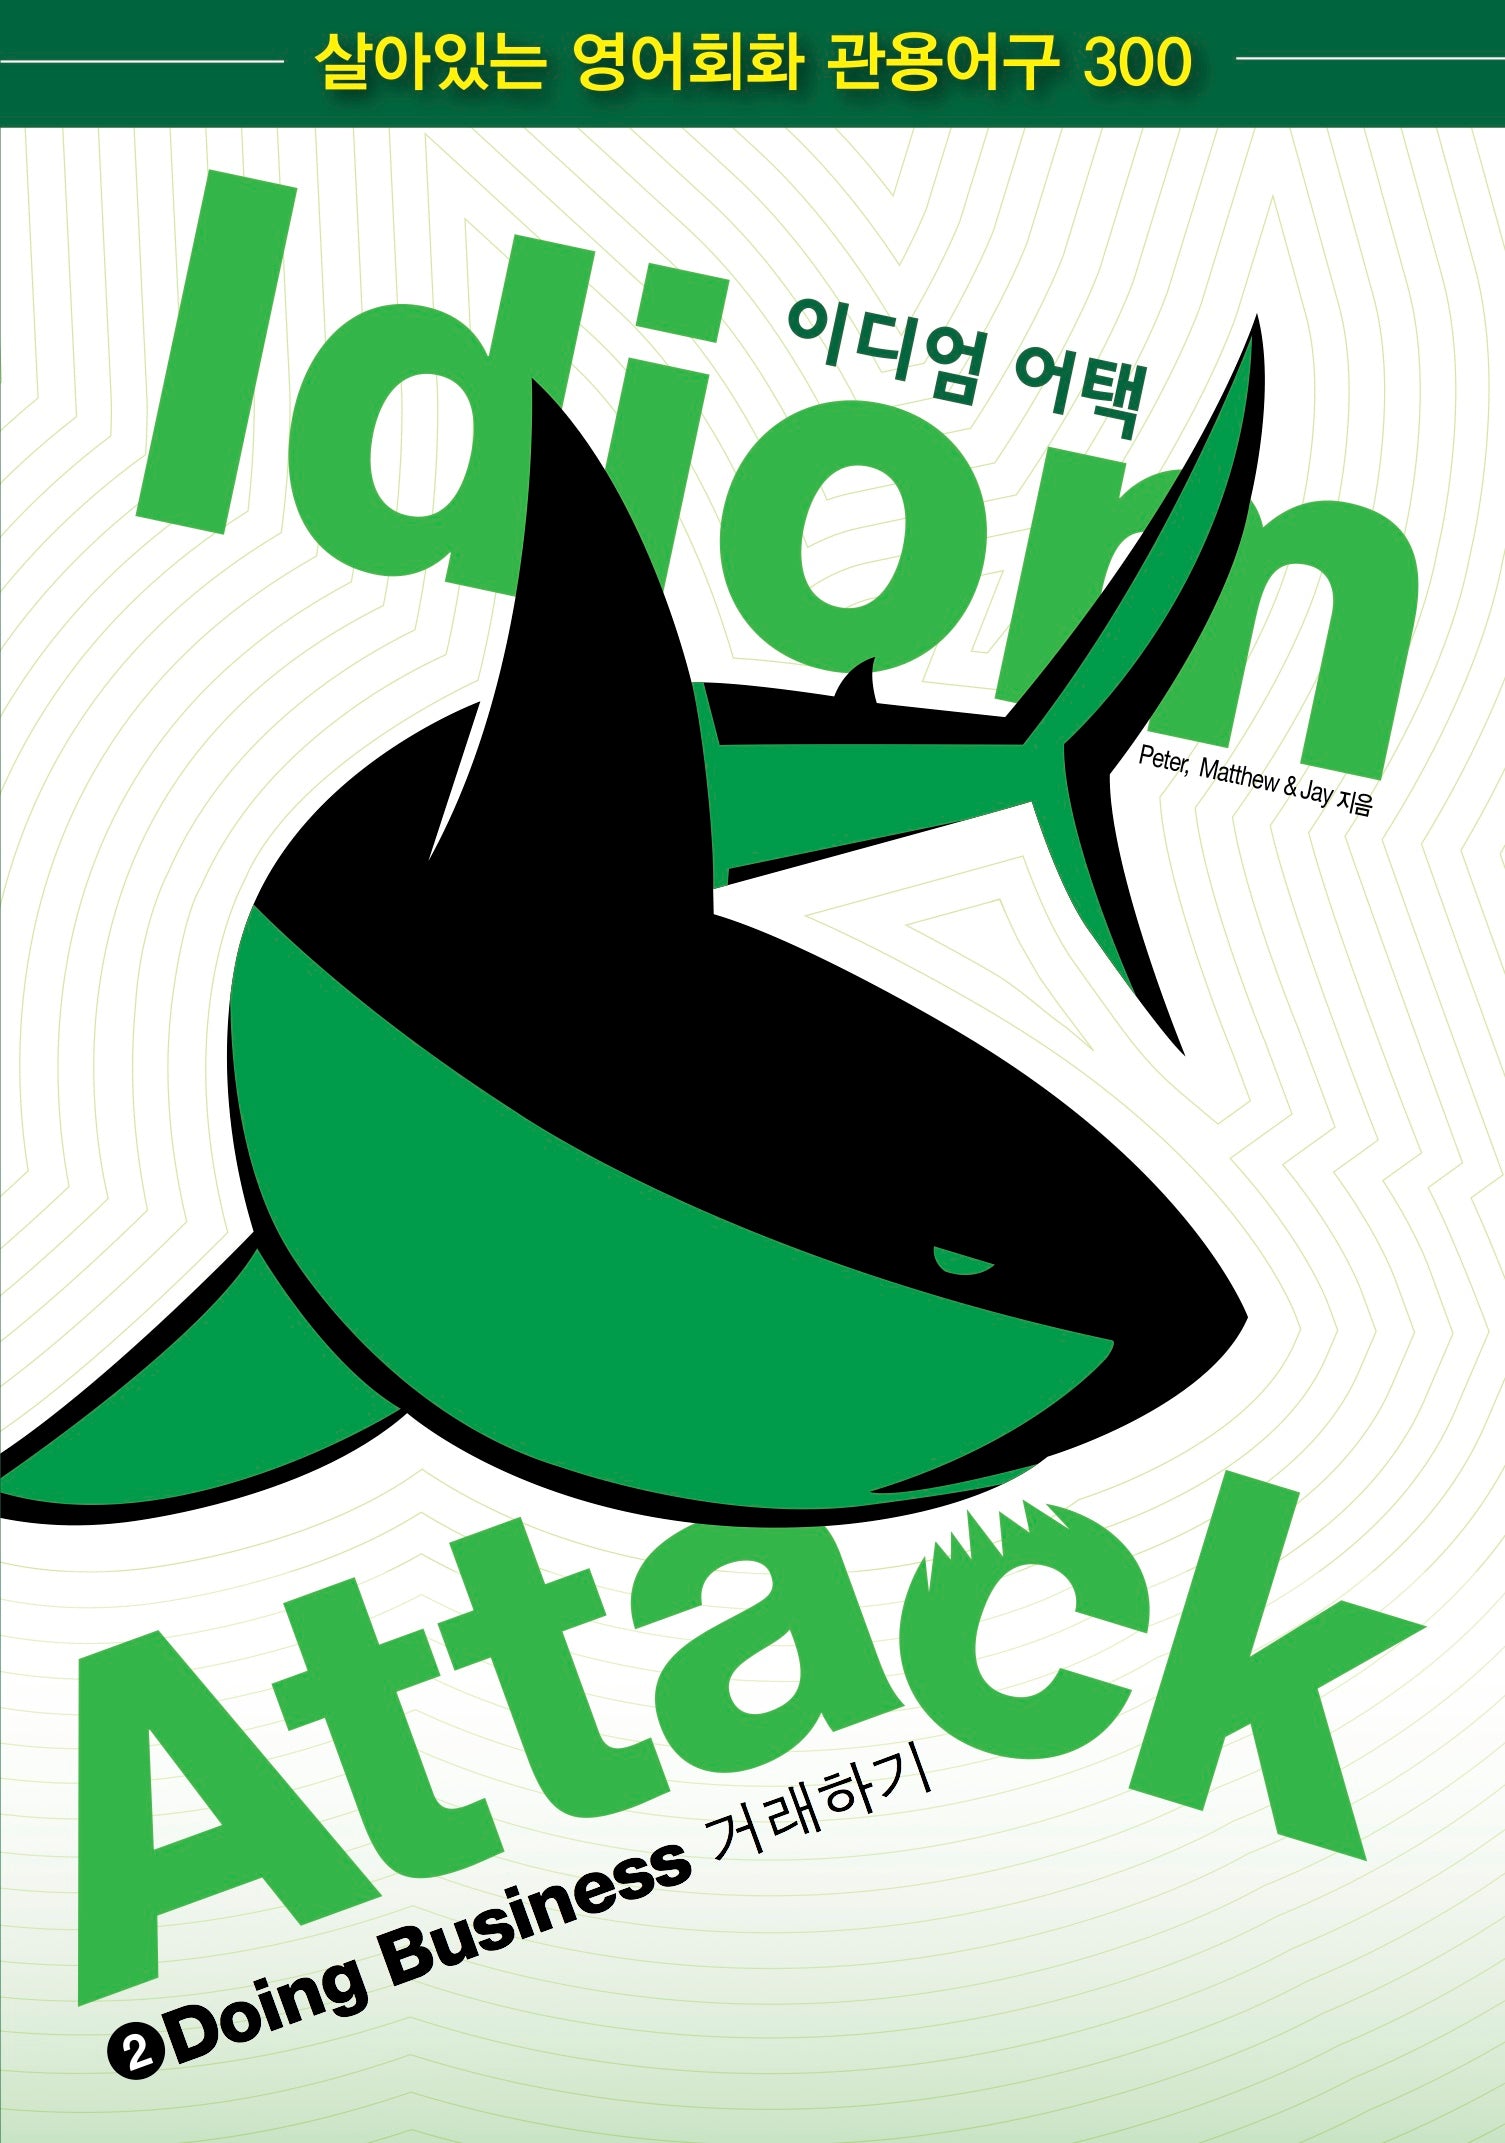 Idiom Attack Vol. 2 - Doing Business (Korean Edition): 이디엄 어택 2 - 거래하기 : English Idioms for ESL Learners: With 300+ Idioms in 25 Themed Chapters w/ free MP3 at IdiomAttack.com